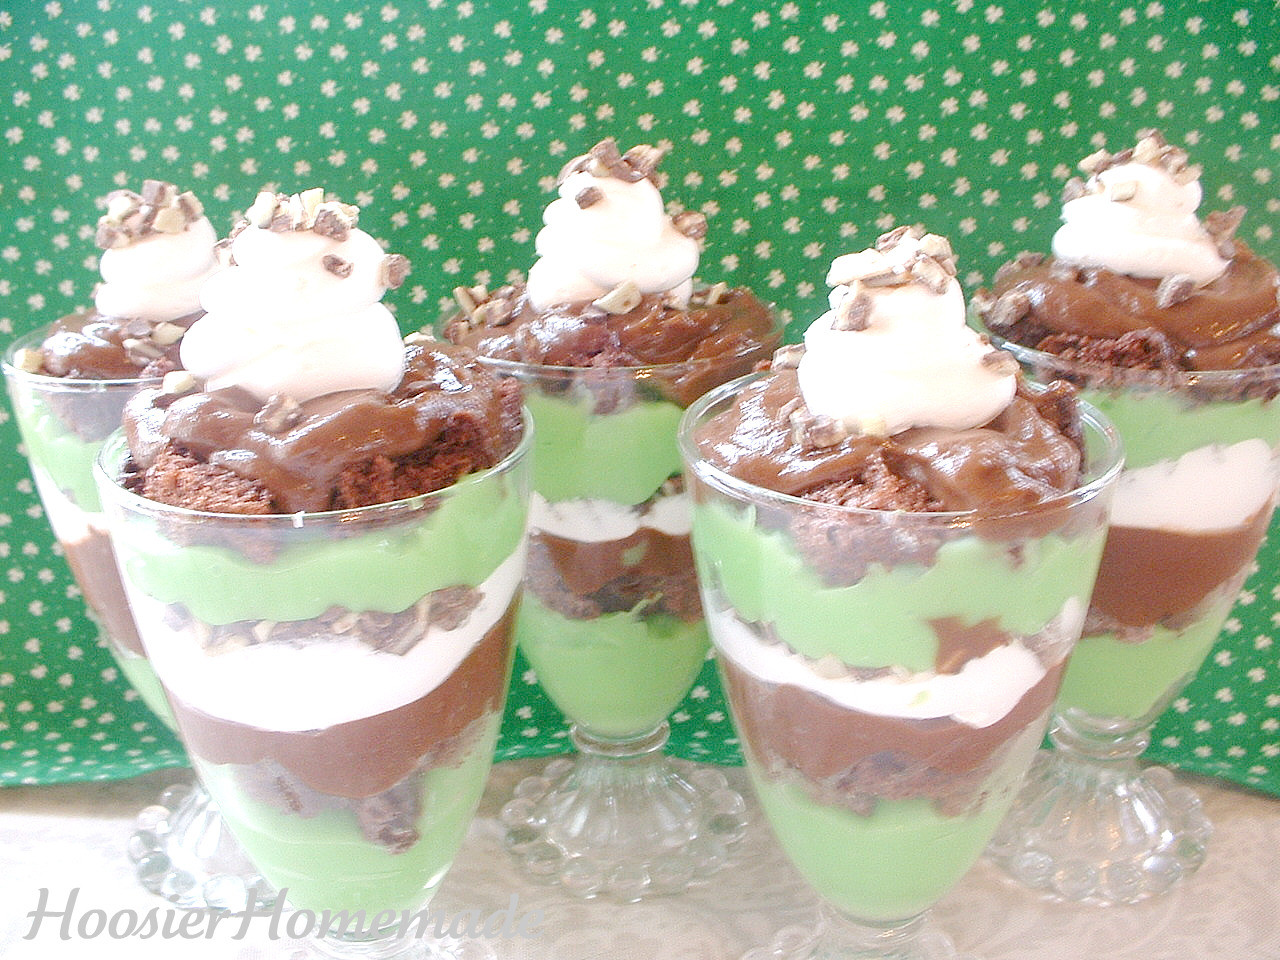 Irish Desserts For St Patrick'S Day
 Meals March 15 21 St Patrick s Day Menu Hoosier Homemade